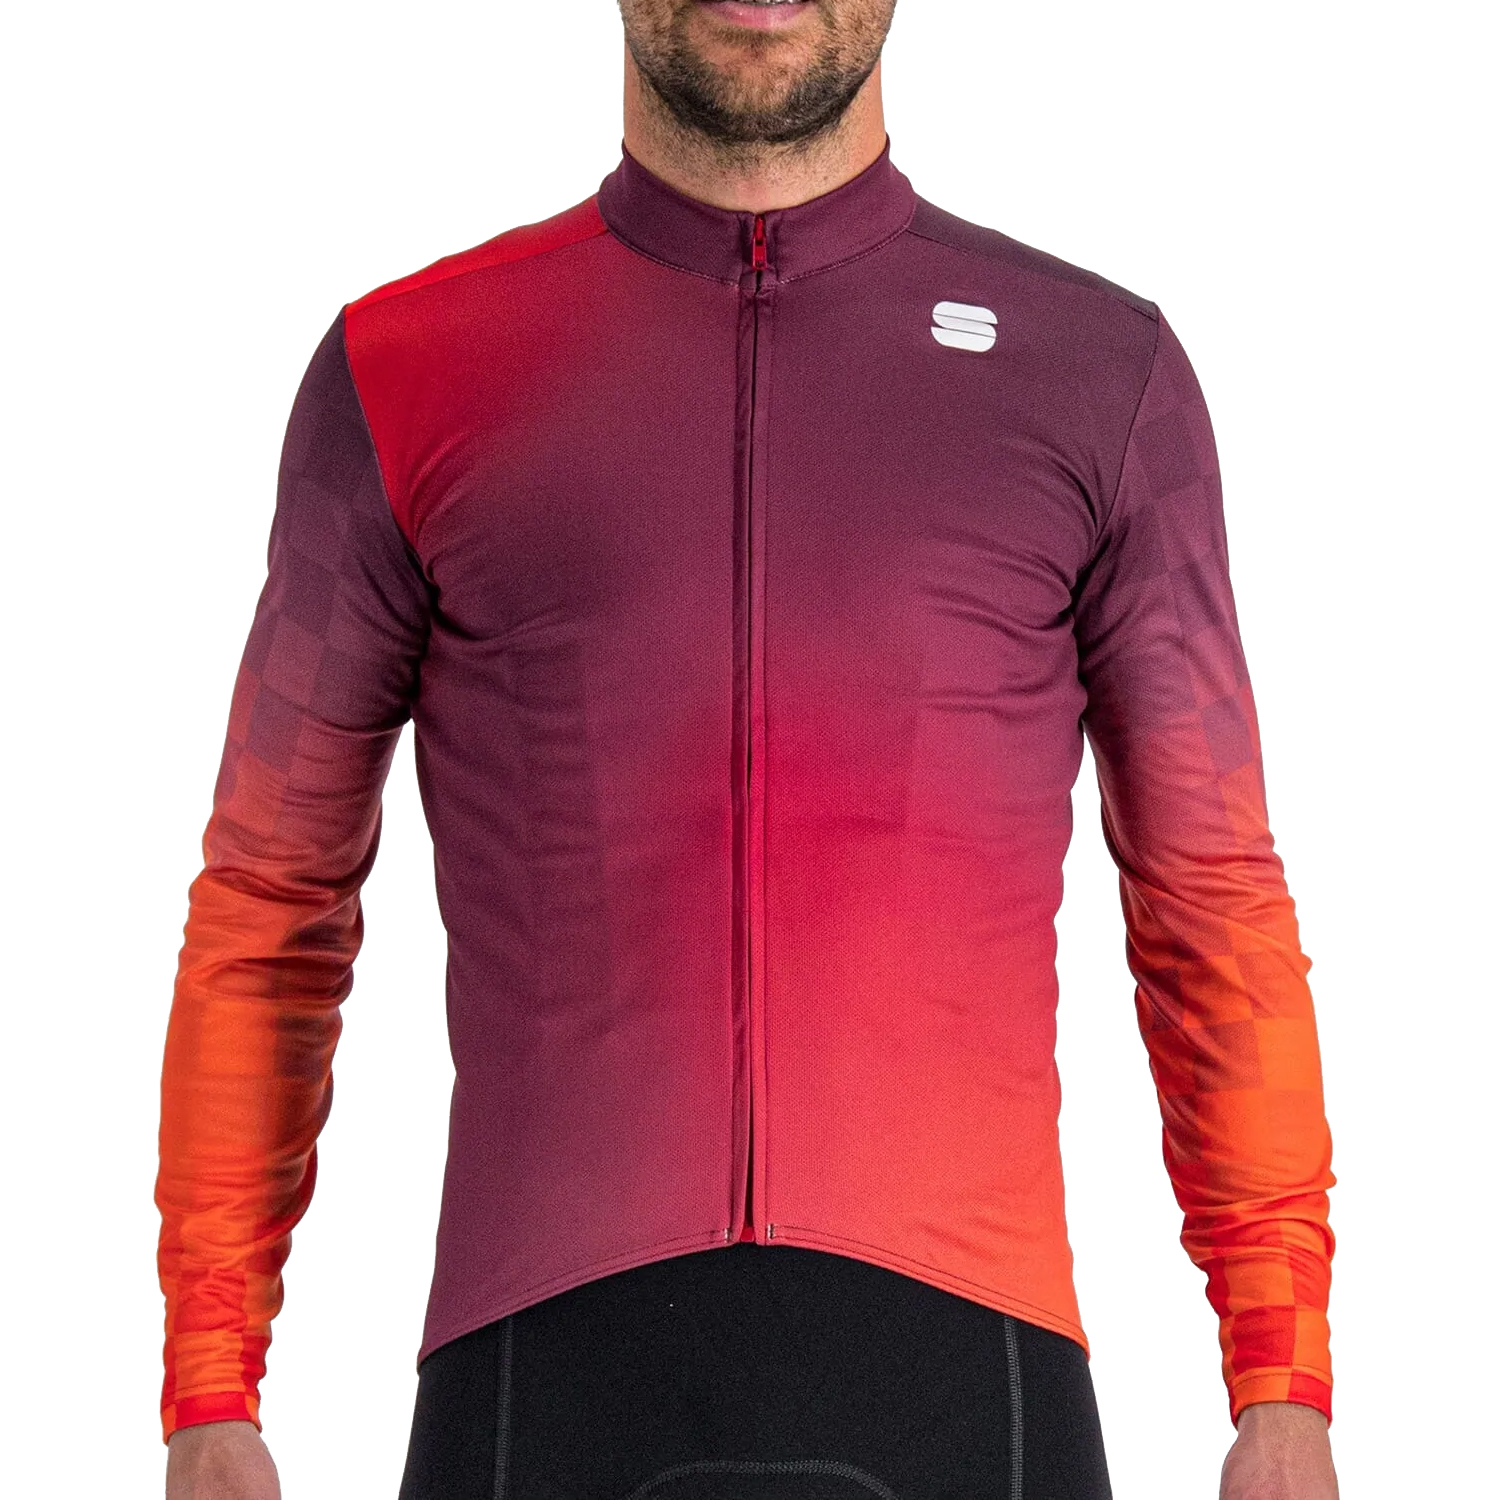 Sportful Rocket Thermal Long Sleeve Cycling Jersey | Merlin Cycles